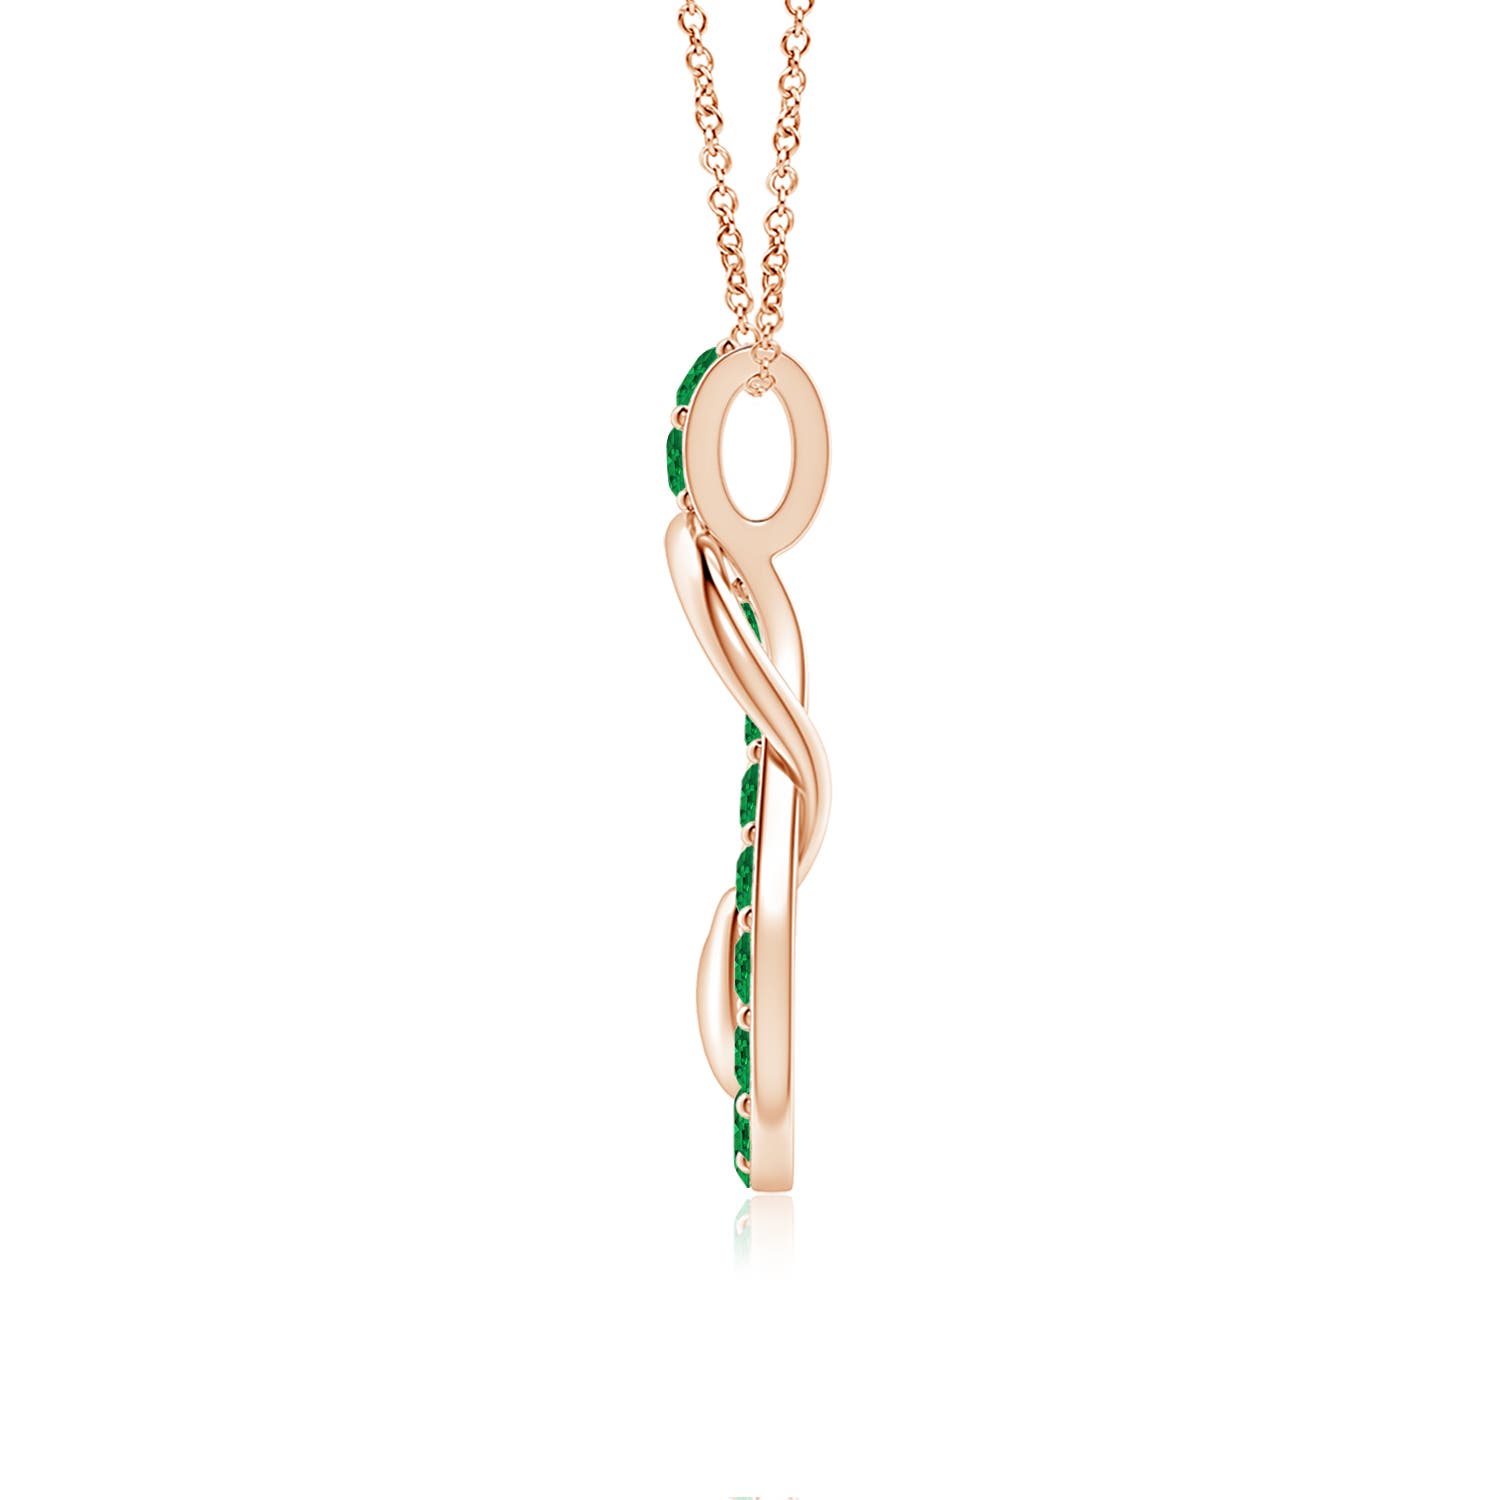 AAA - Emerald / 1.2 CT / 18 KT Rose Gold